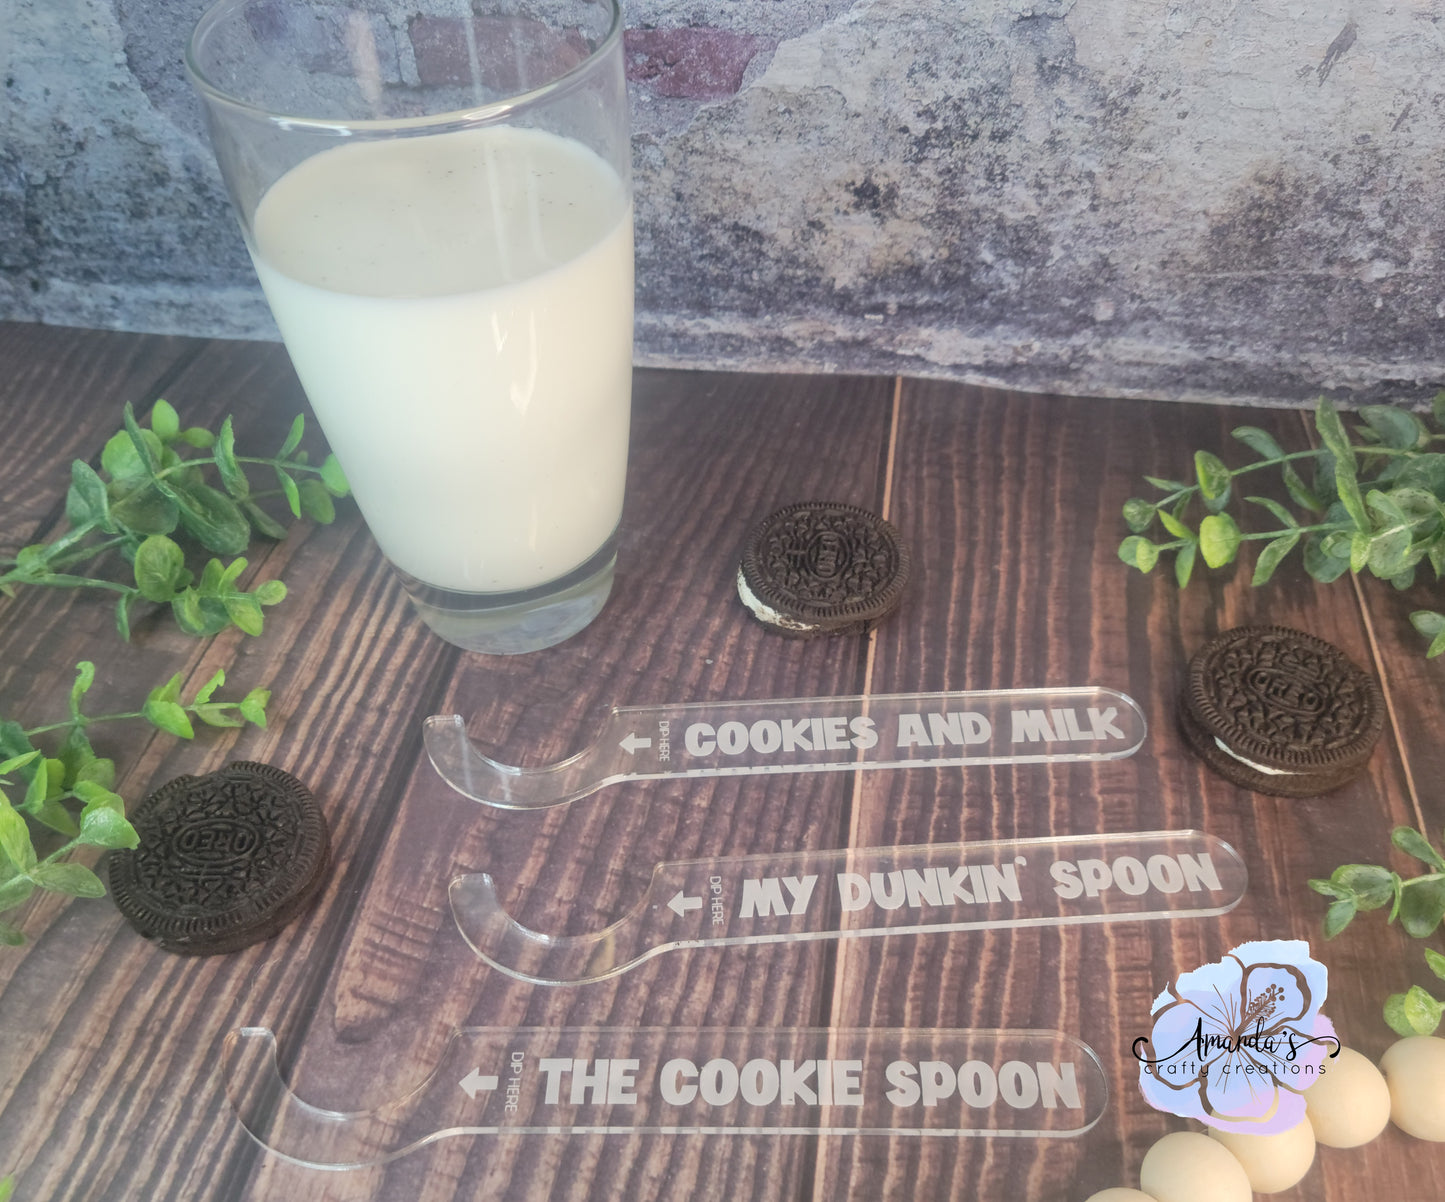 3d printed and engraved cookie holder for dunking cookies in milk